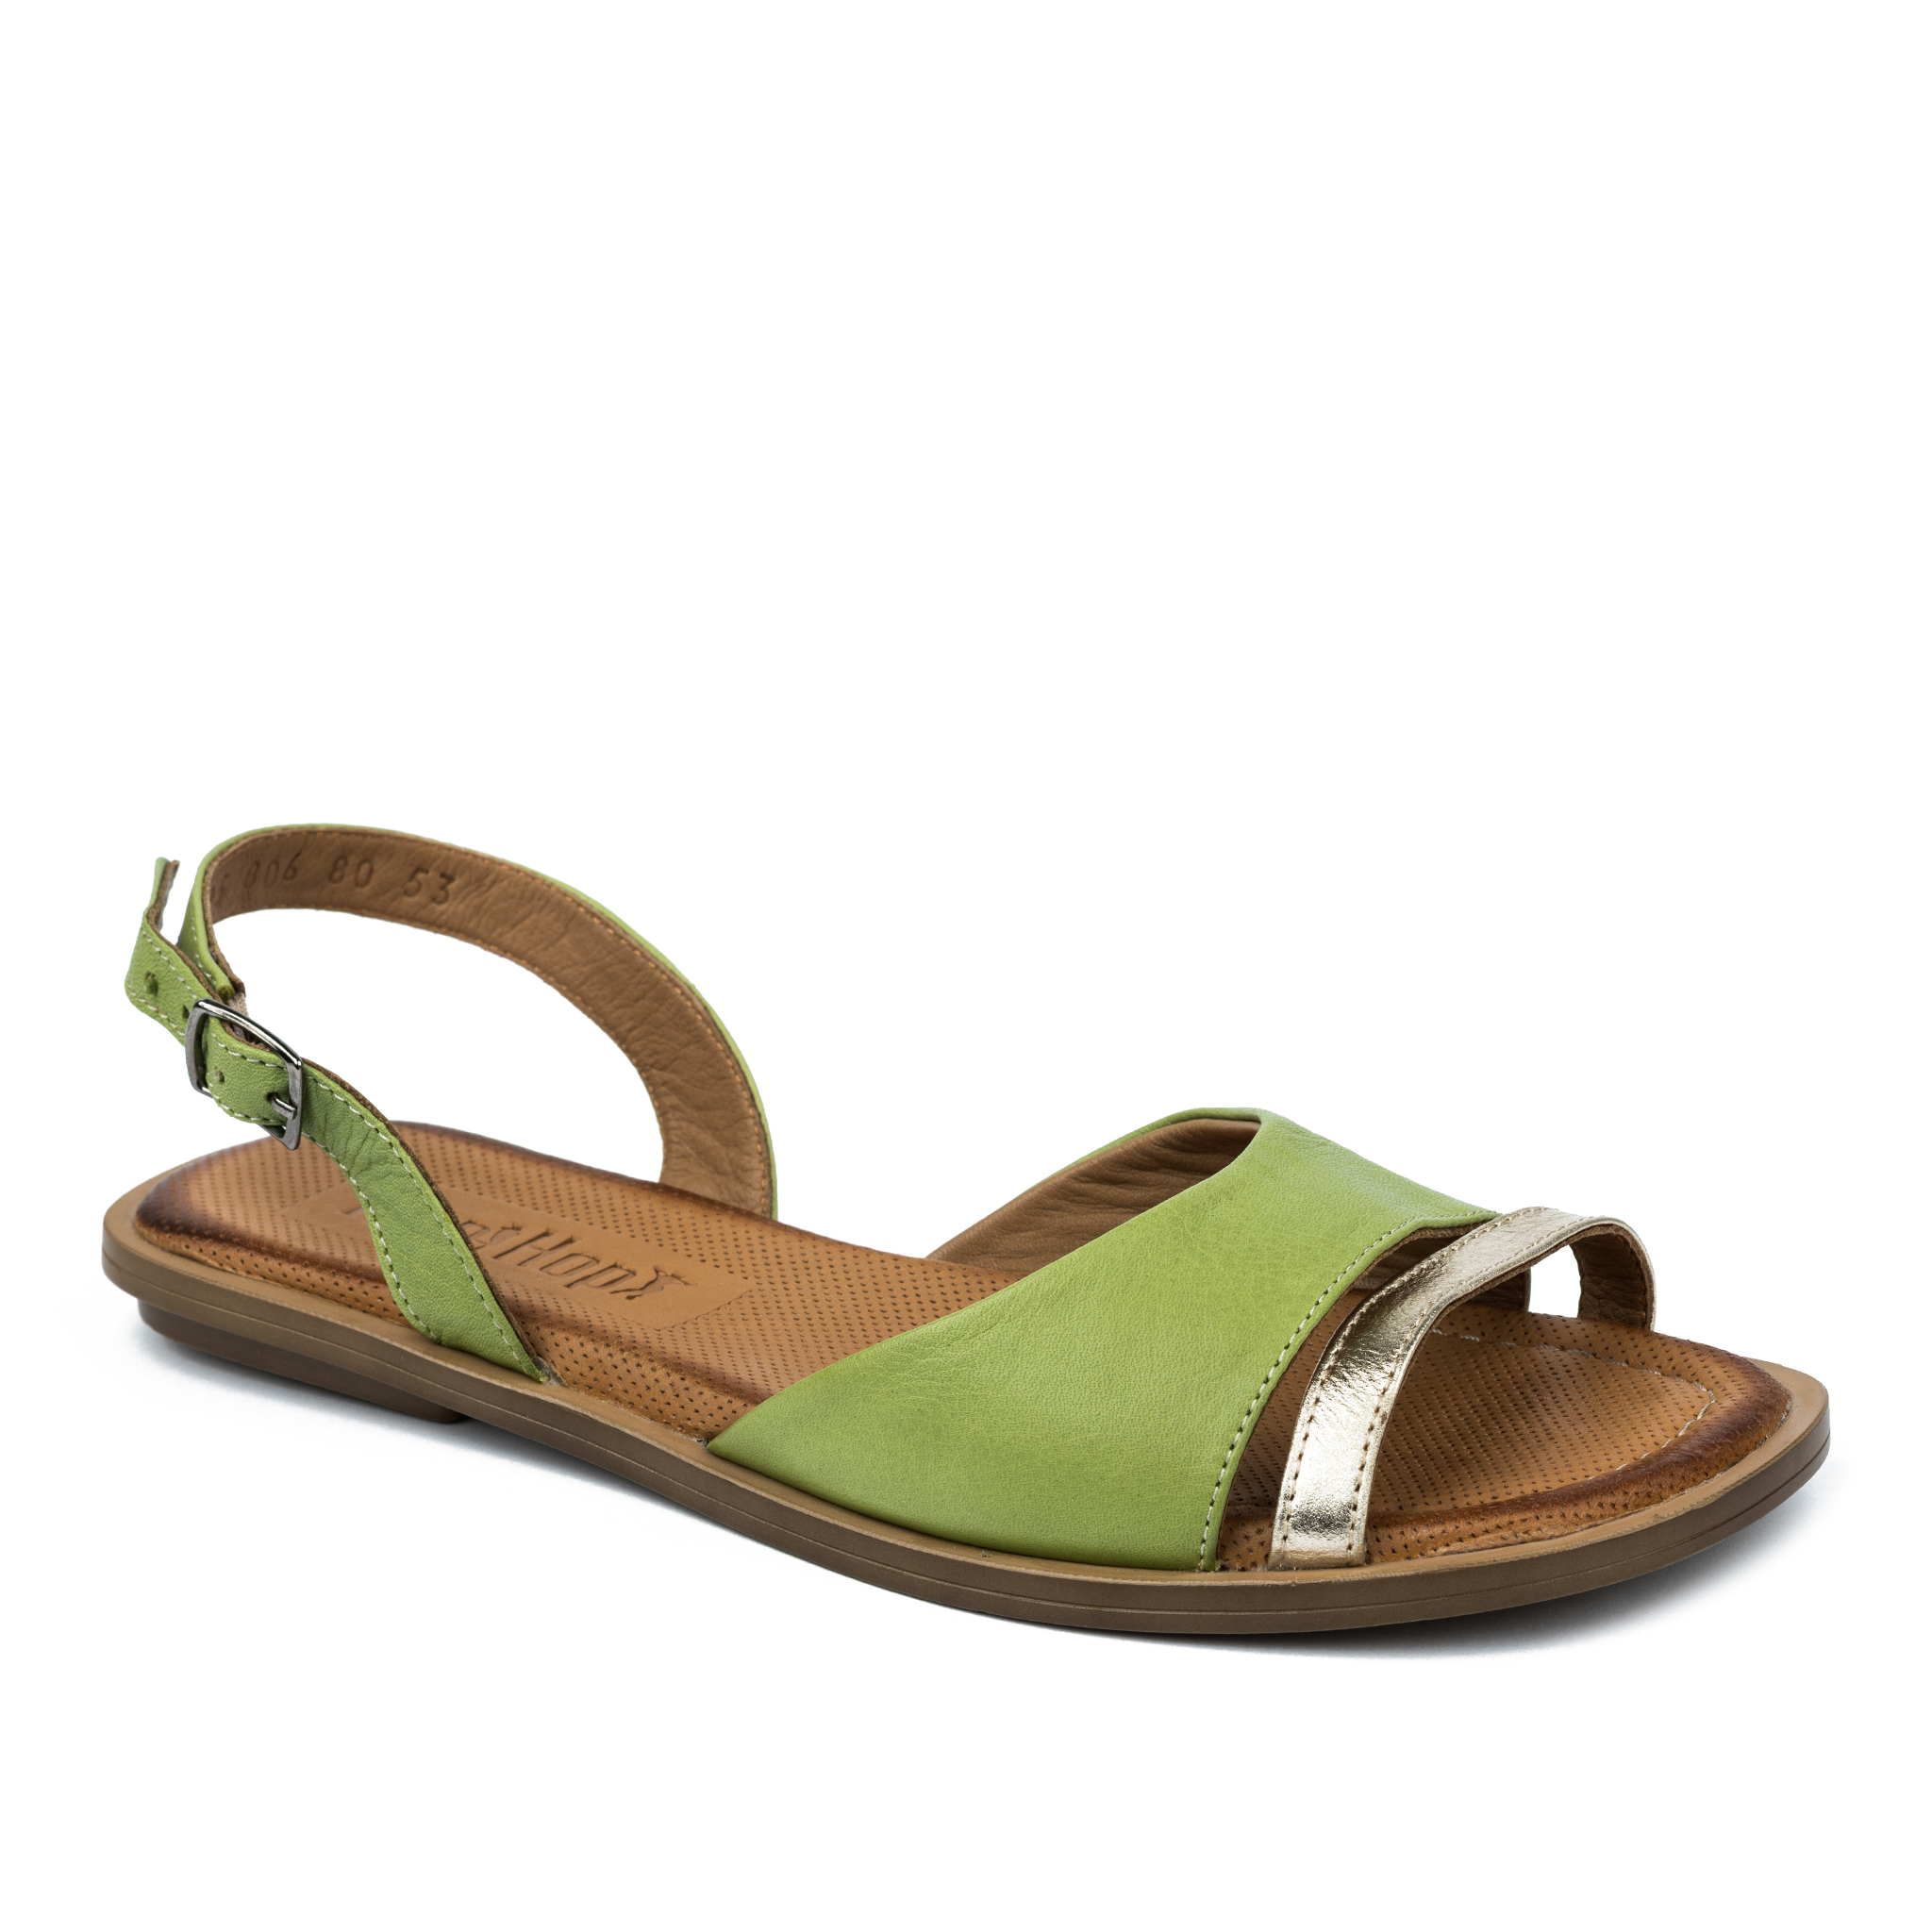 Leather sandals A789 - GREEN